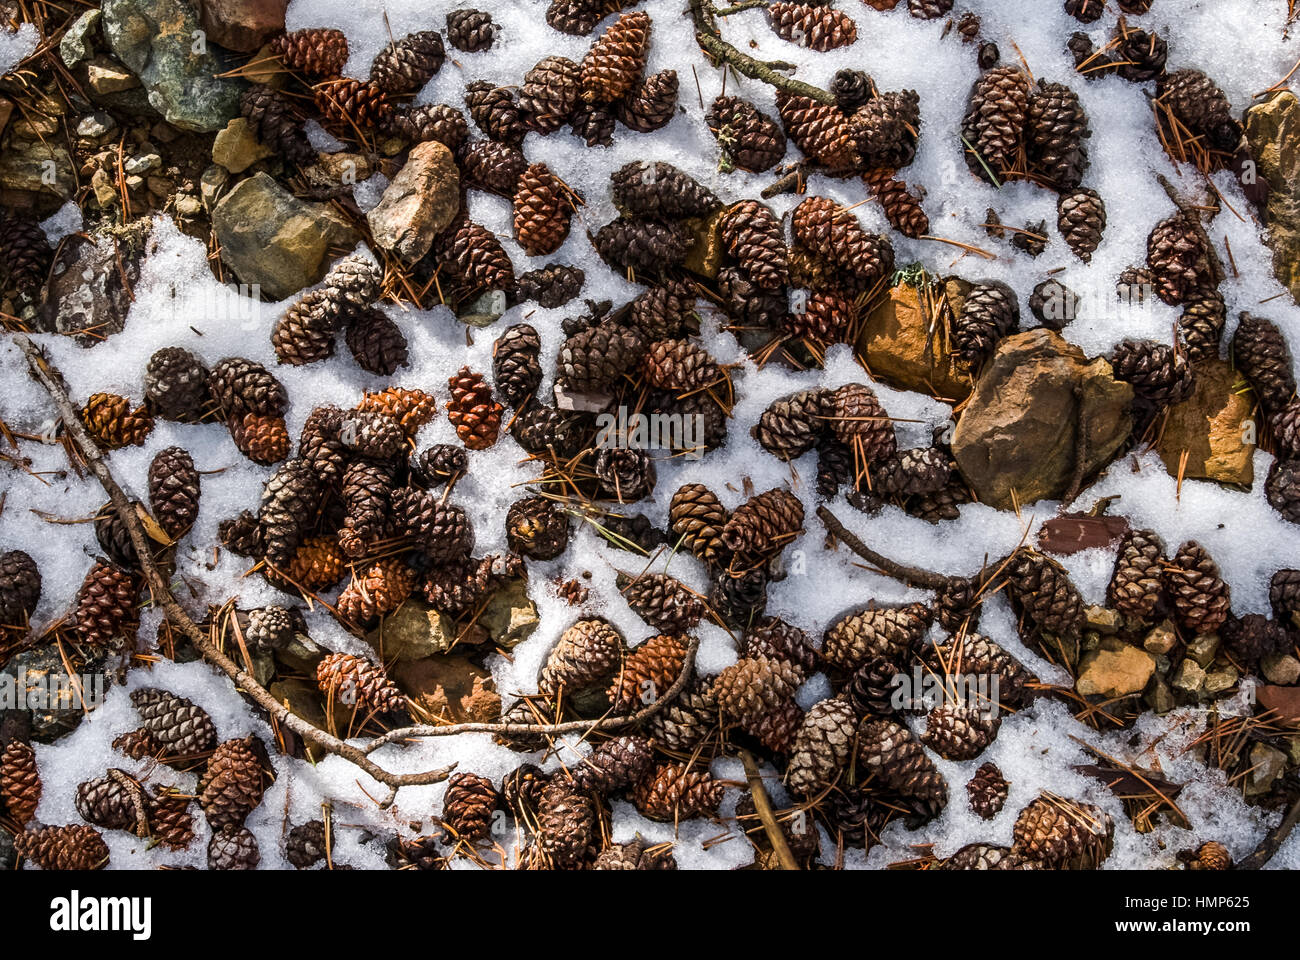 Pine needles and pine cones covering a woodland snow floor. Mauntantains Troodos on Cyprus. Stock Photo